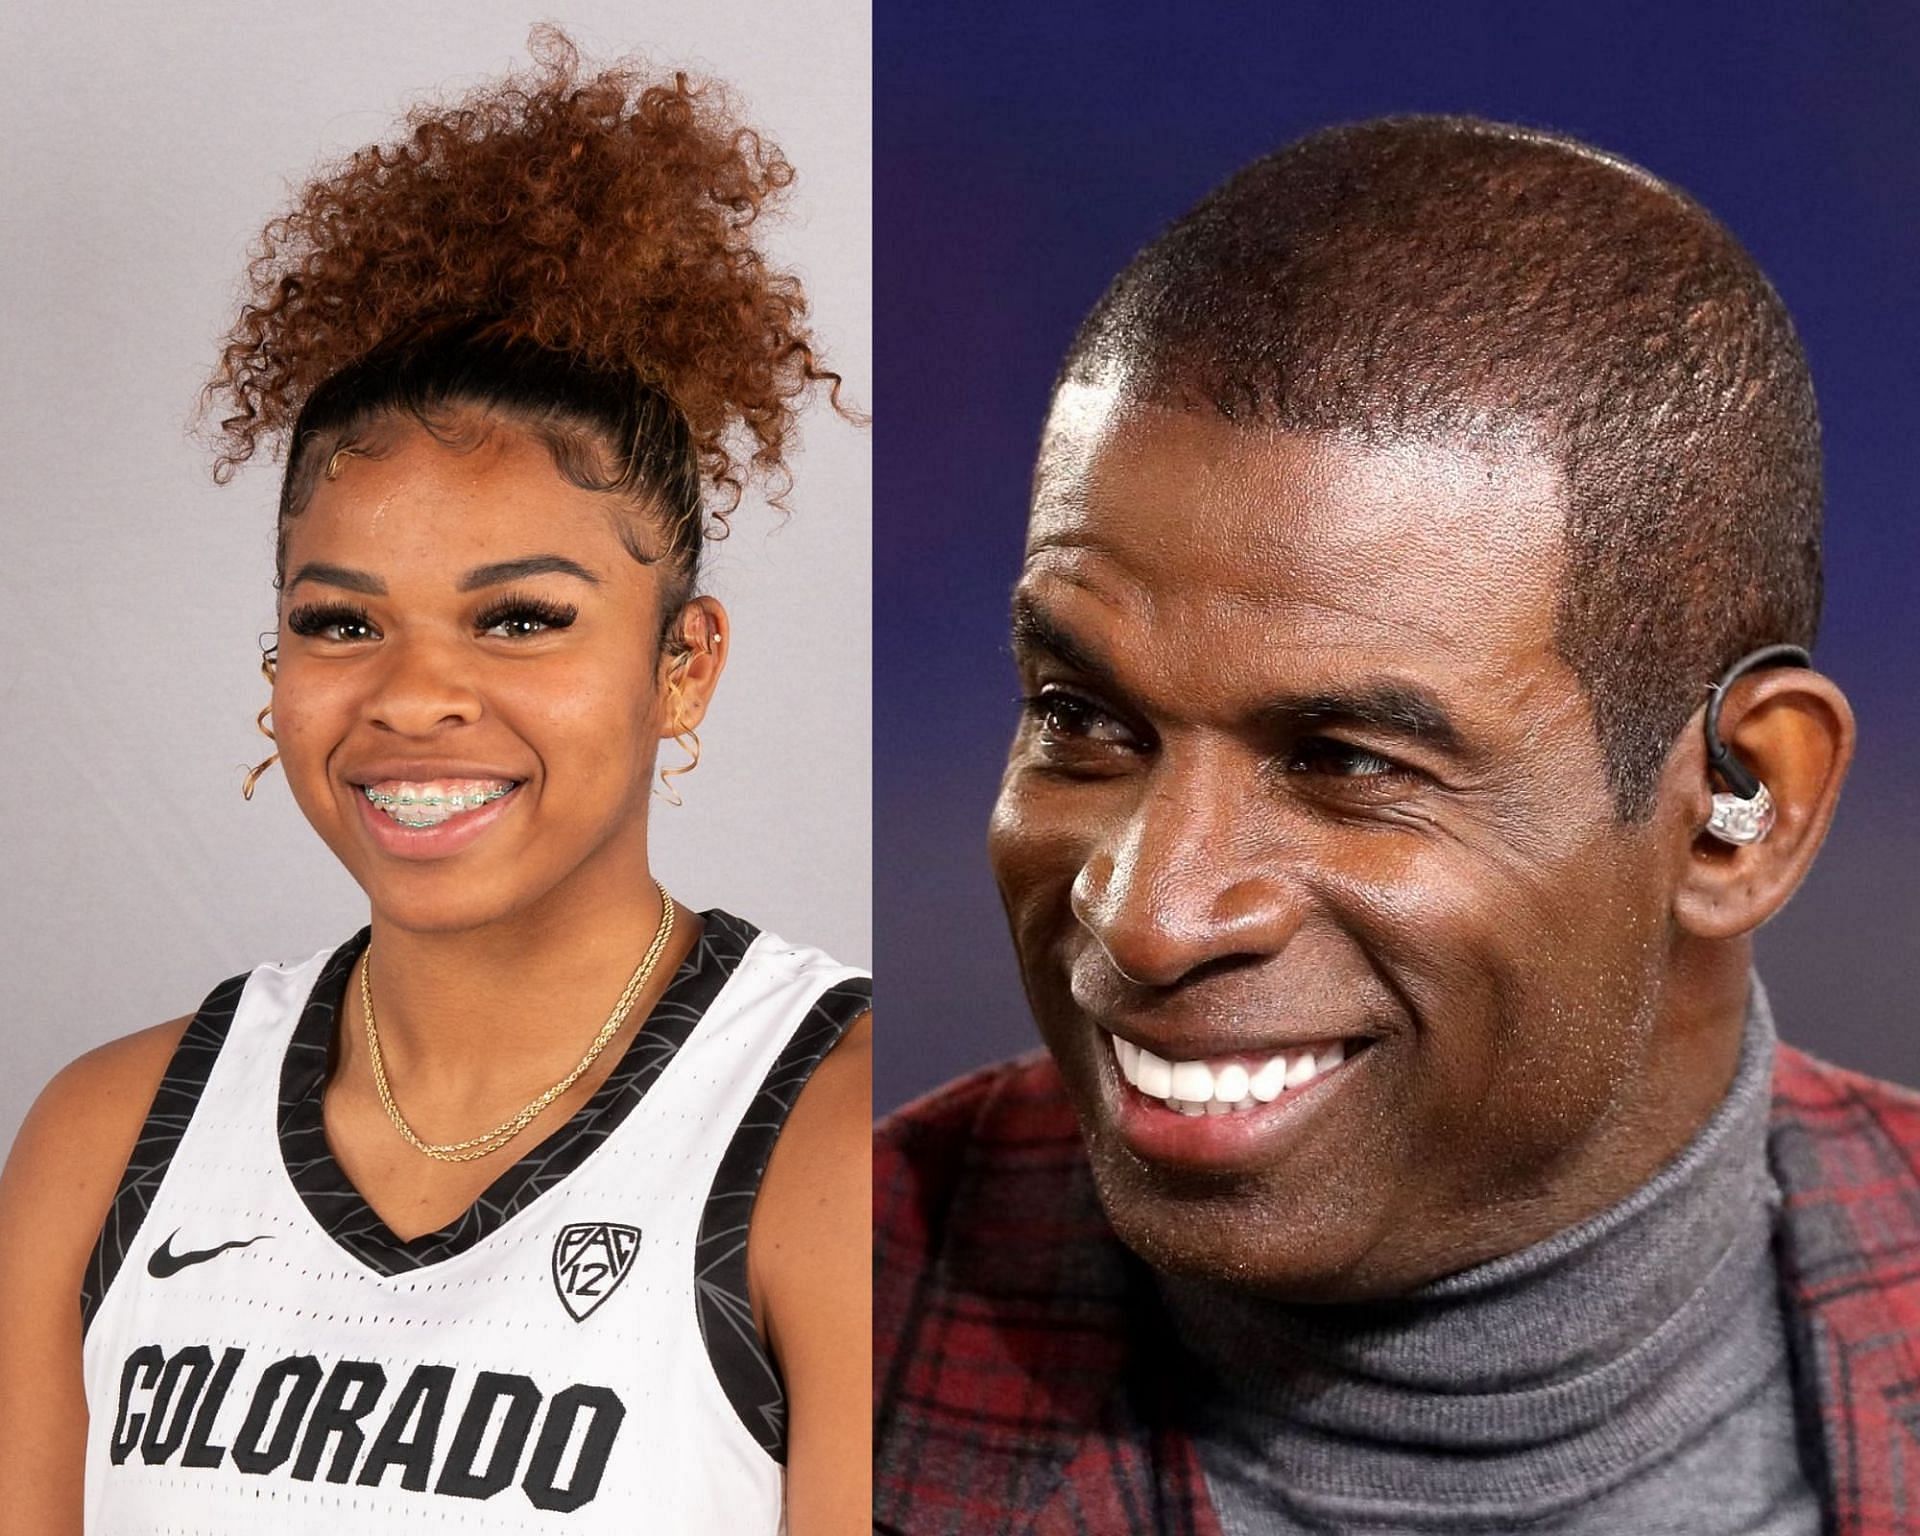 Who is Deion Sanders' daughter, Shelomi Sanders? More about the